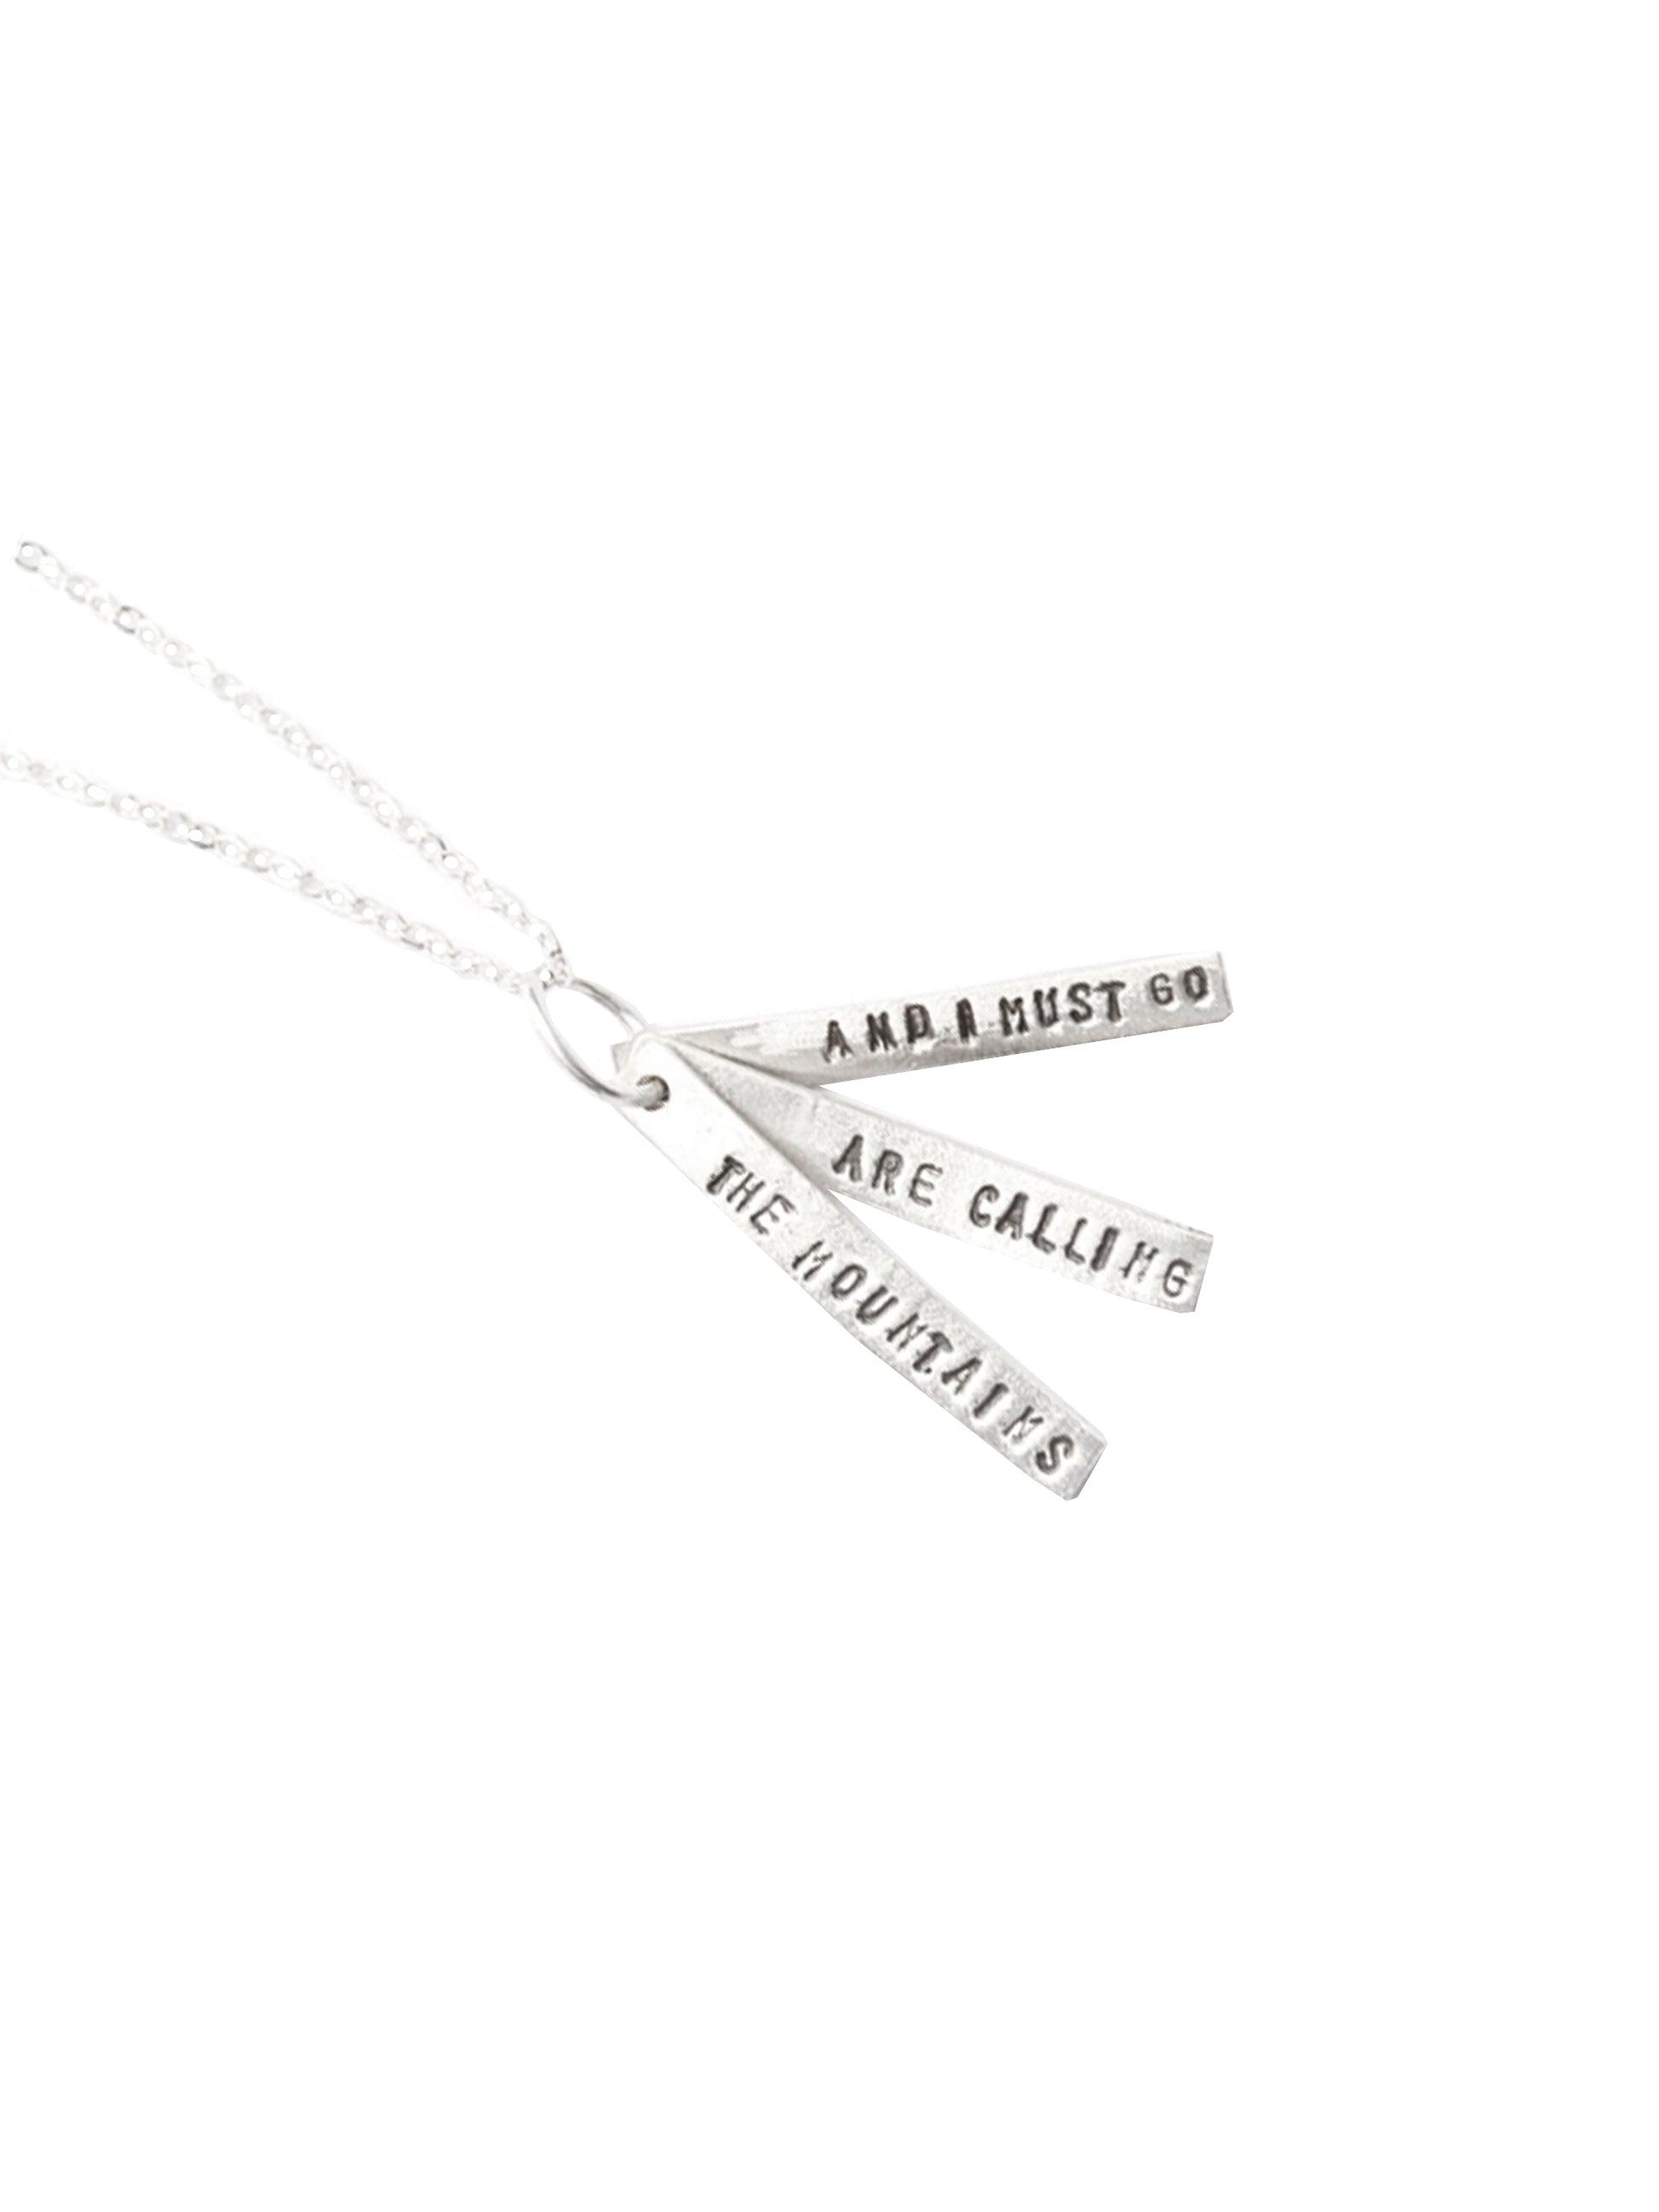 Chocolate & Steel Long-Bar Quote Necklace John Muir The Mountains Are Calling Silver Weston Table